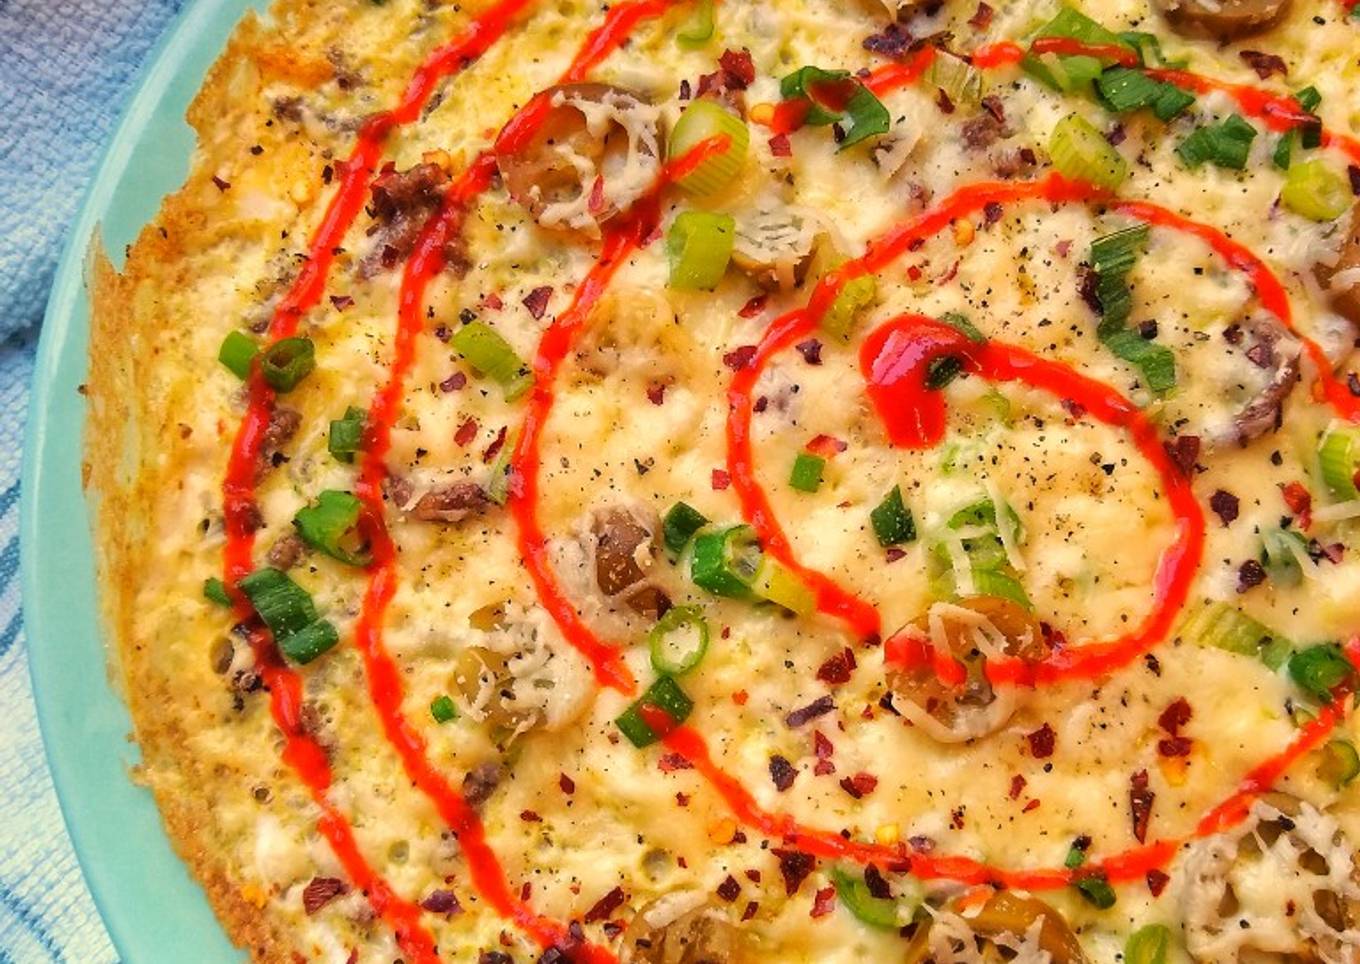 Hot ‘n’ Spicy Pizza Omelette